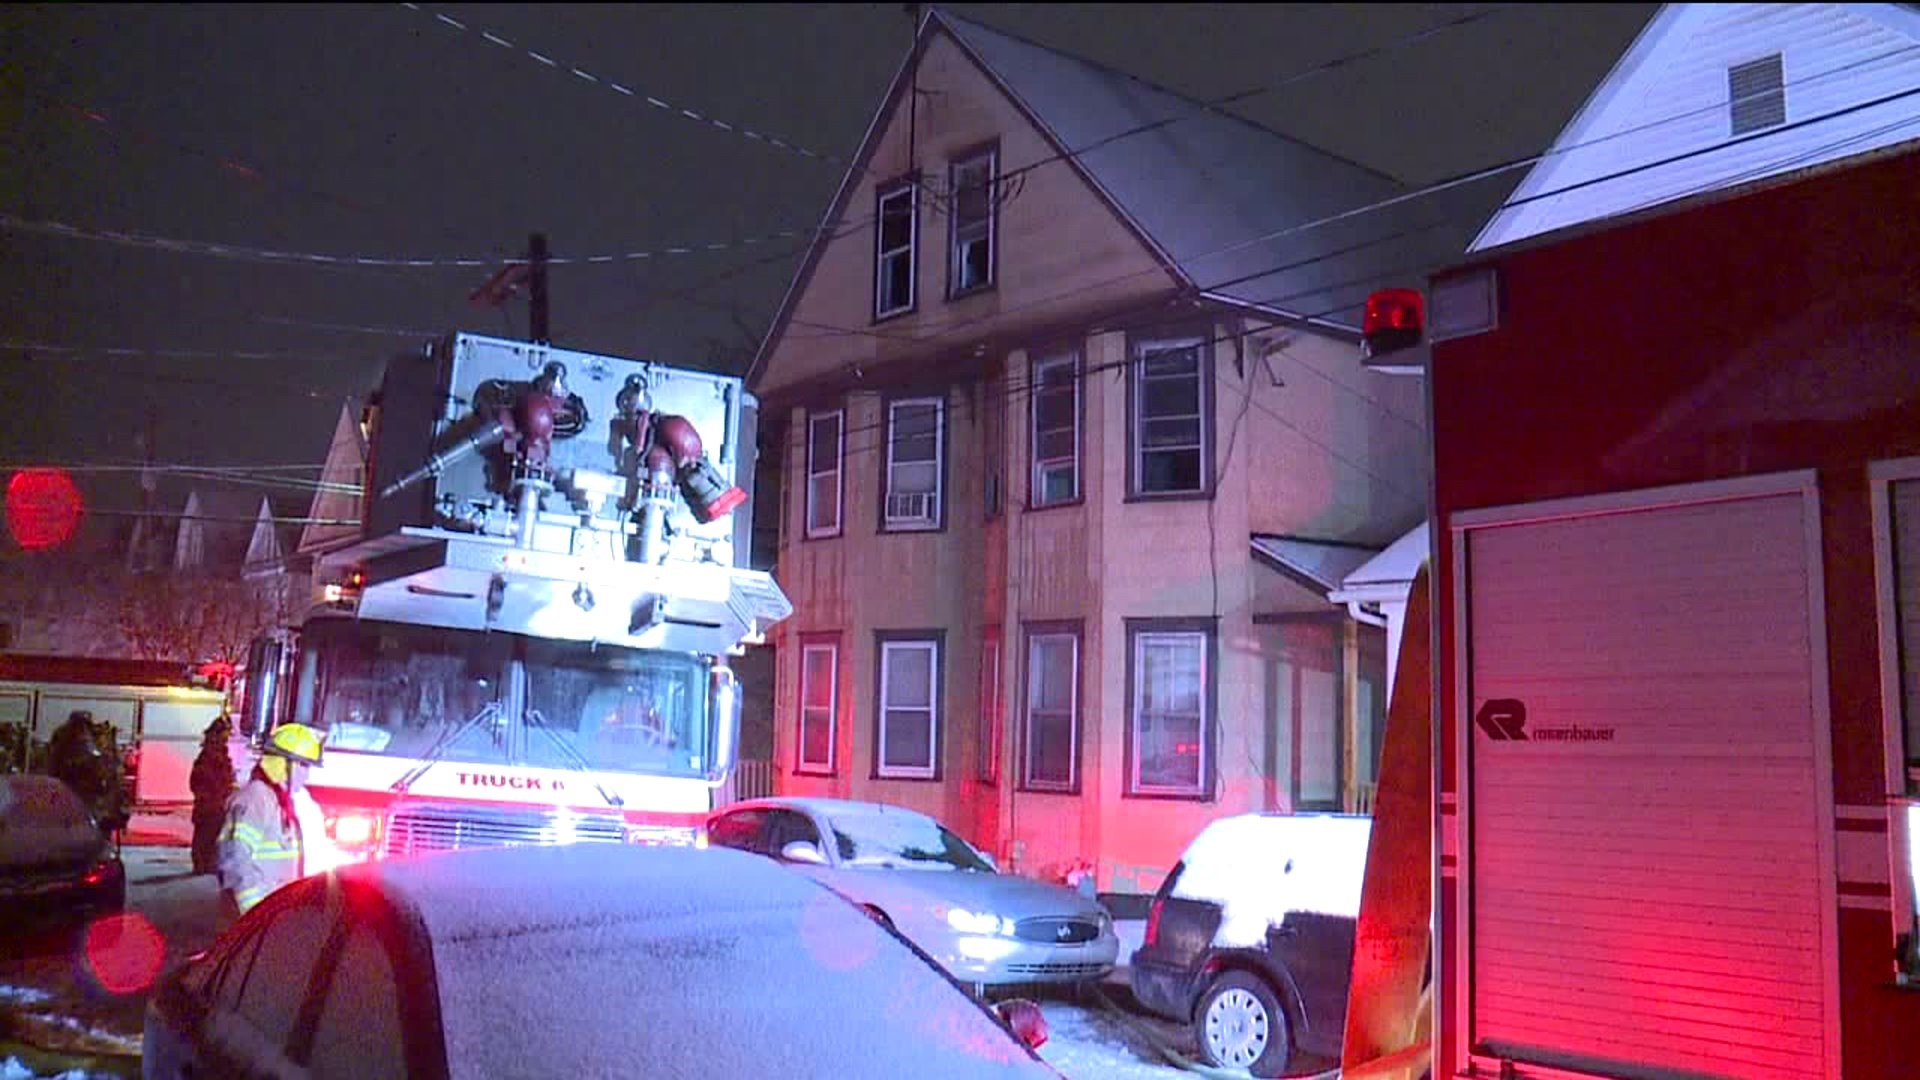 Family Safe After Escaping Burning Home in Wilkes-Barre